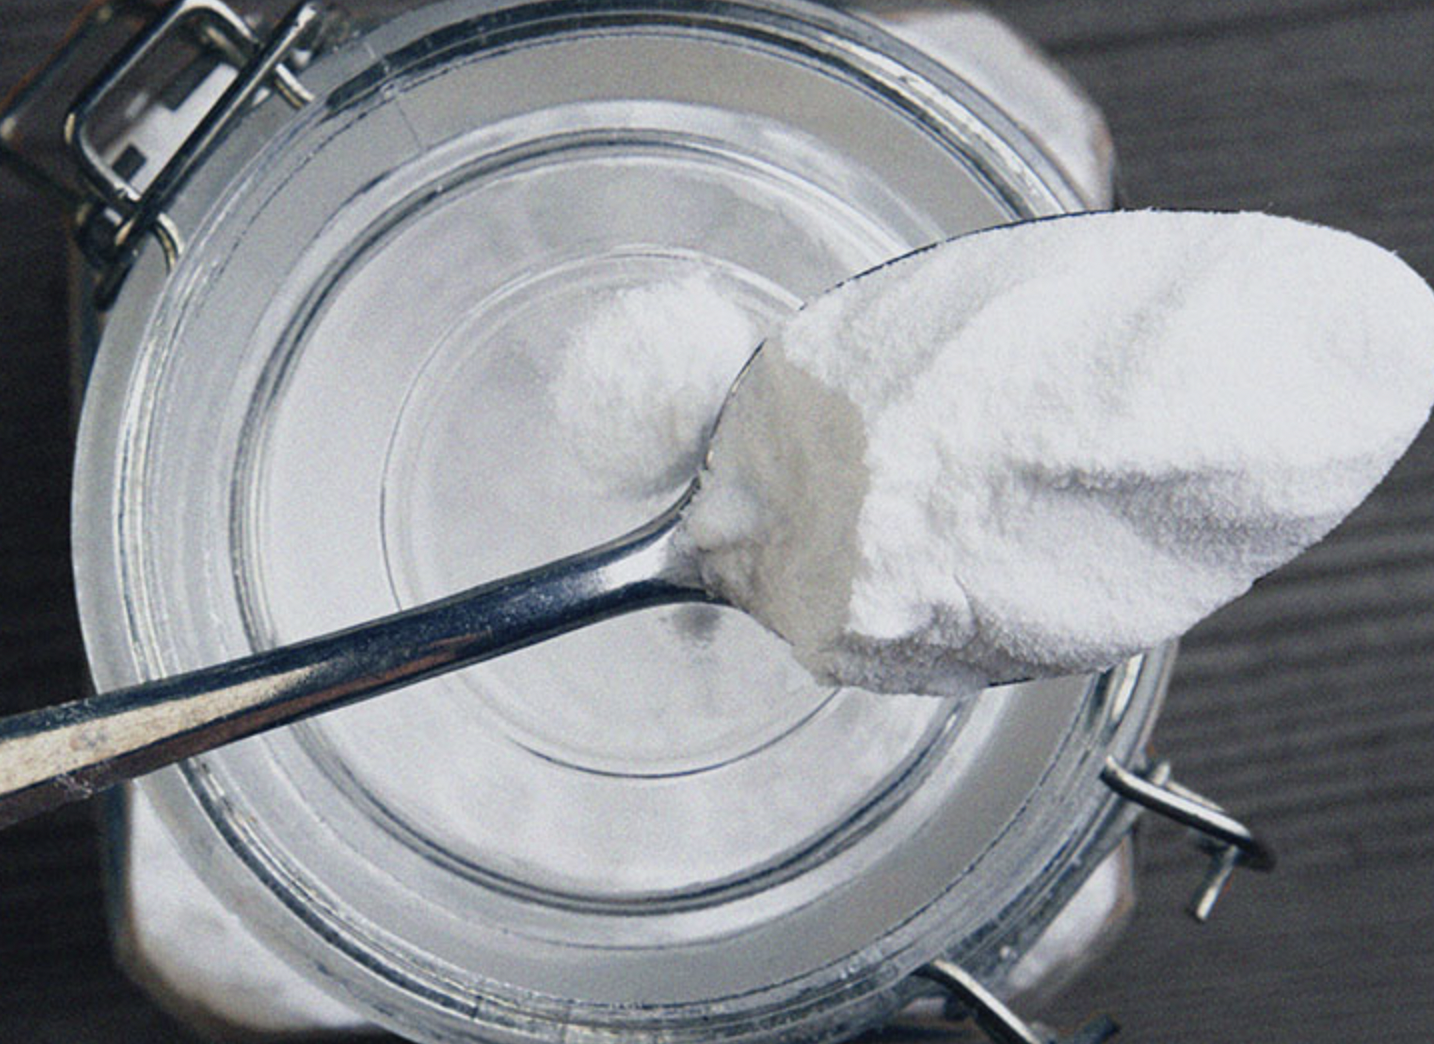 Can Baking Soda Heal Stomach Ulcers?